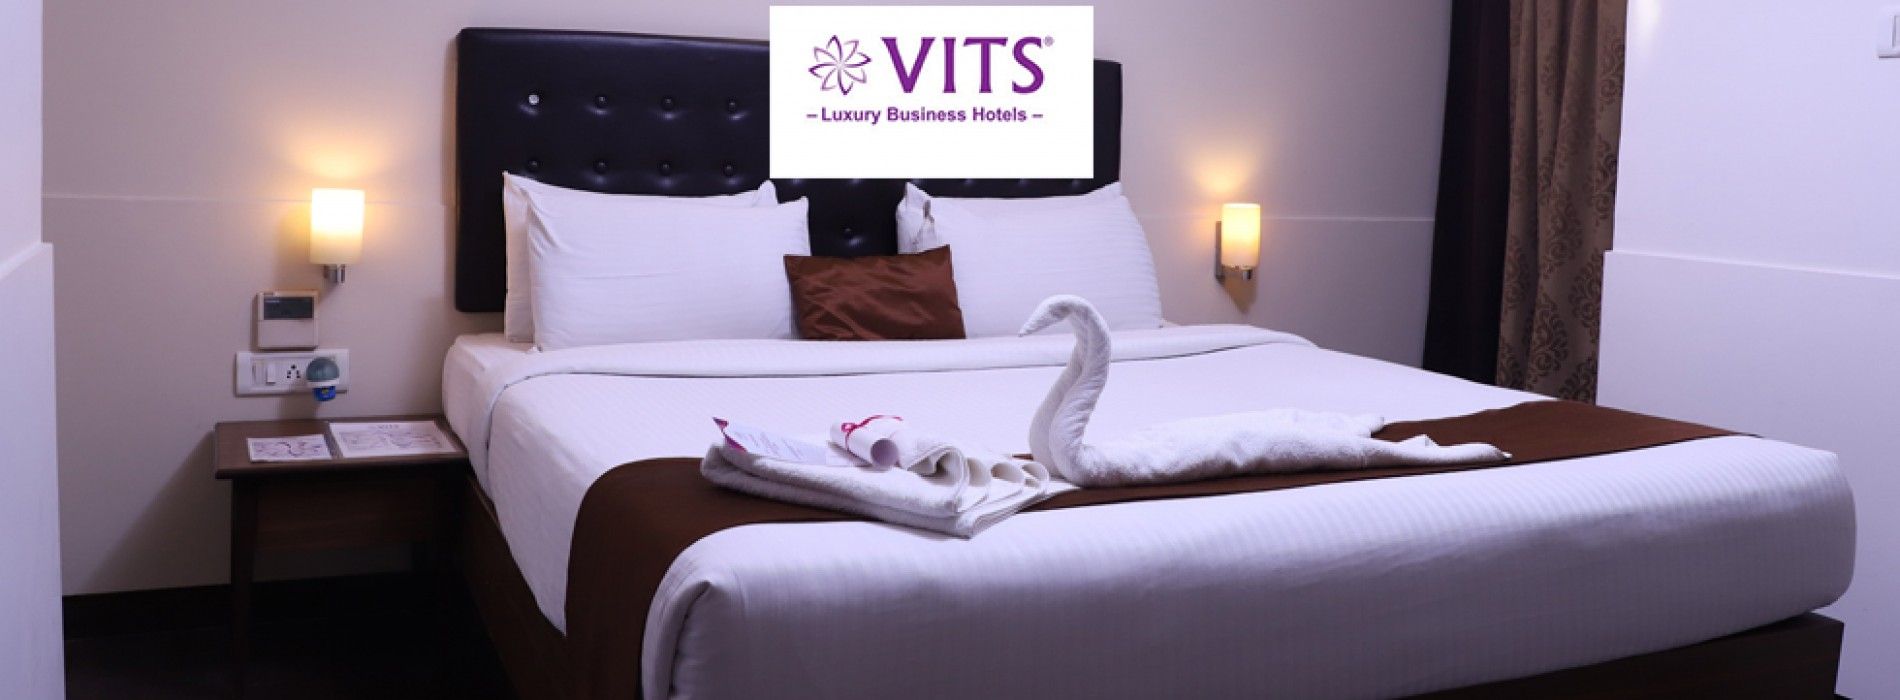 VITS Hotels worldwide marks its debut in the city of Taj with launch of VITS Agra